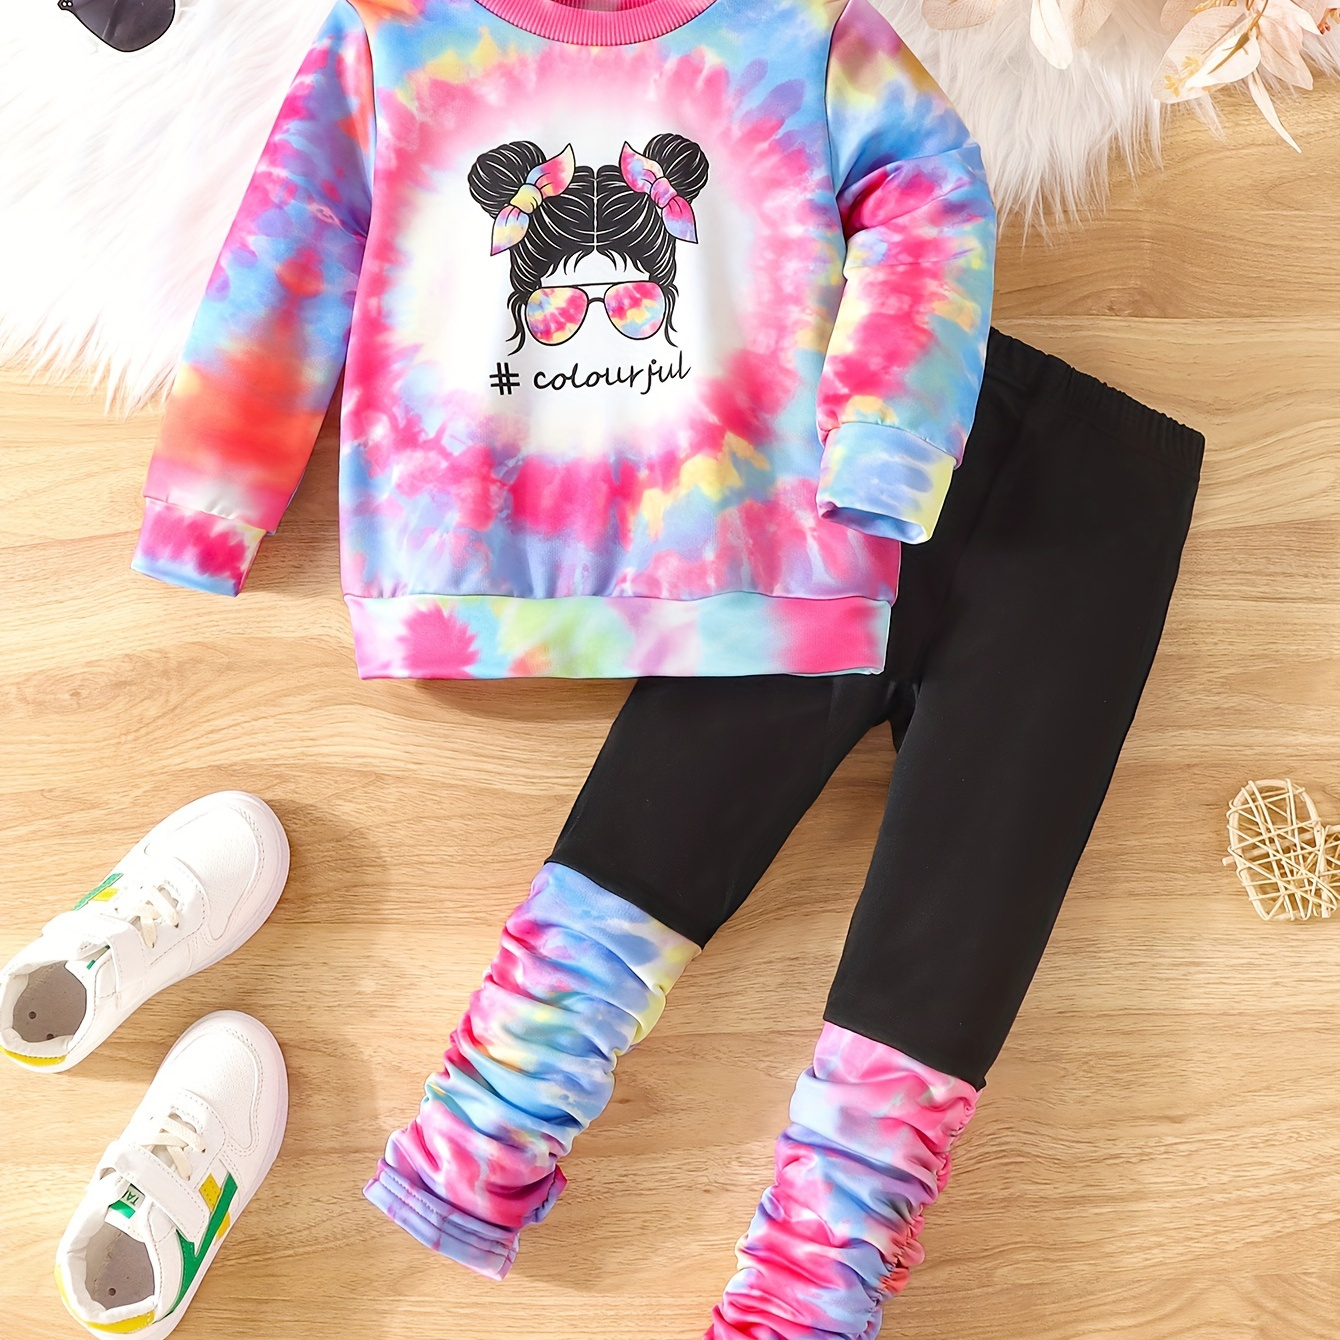 

2pcs Girl's Tie-dye Sweatshirt Outfit, Anime Girl Pattern Long Sleeve Top & Pants Set, Kid's Clothes For Spring Fall